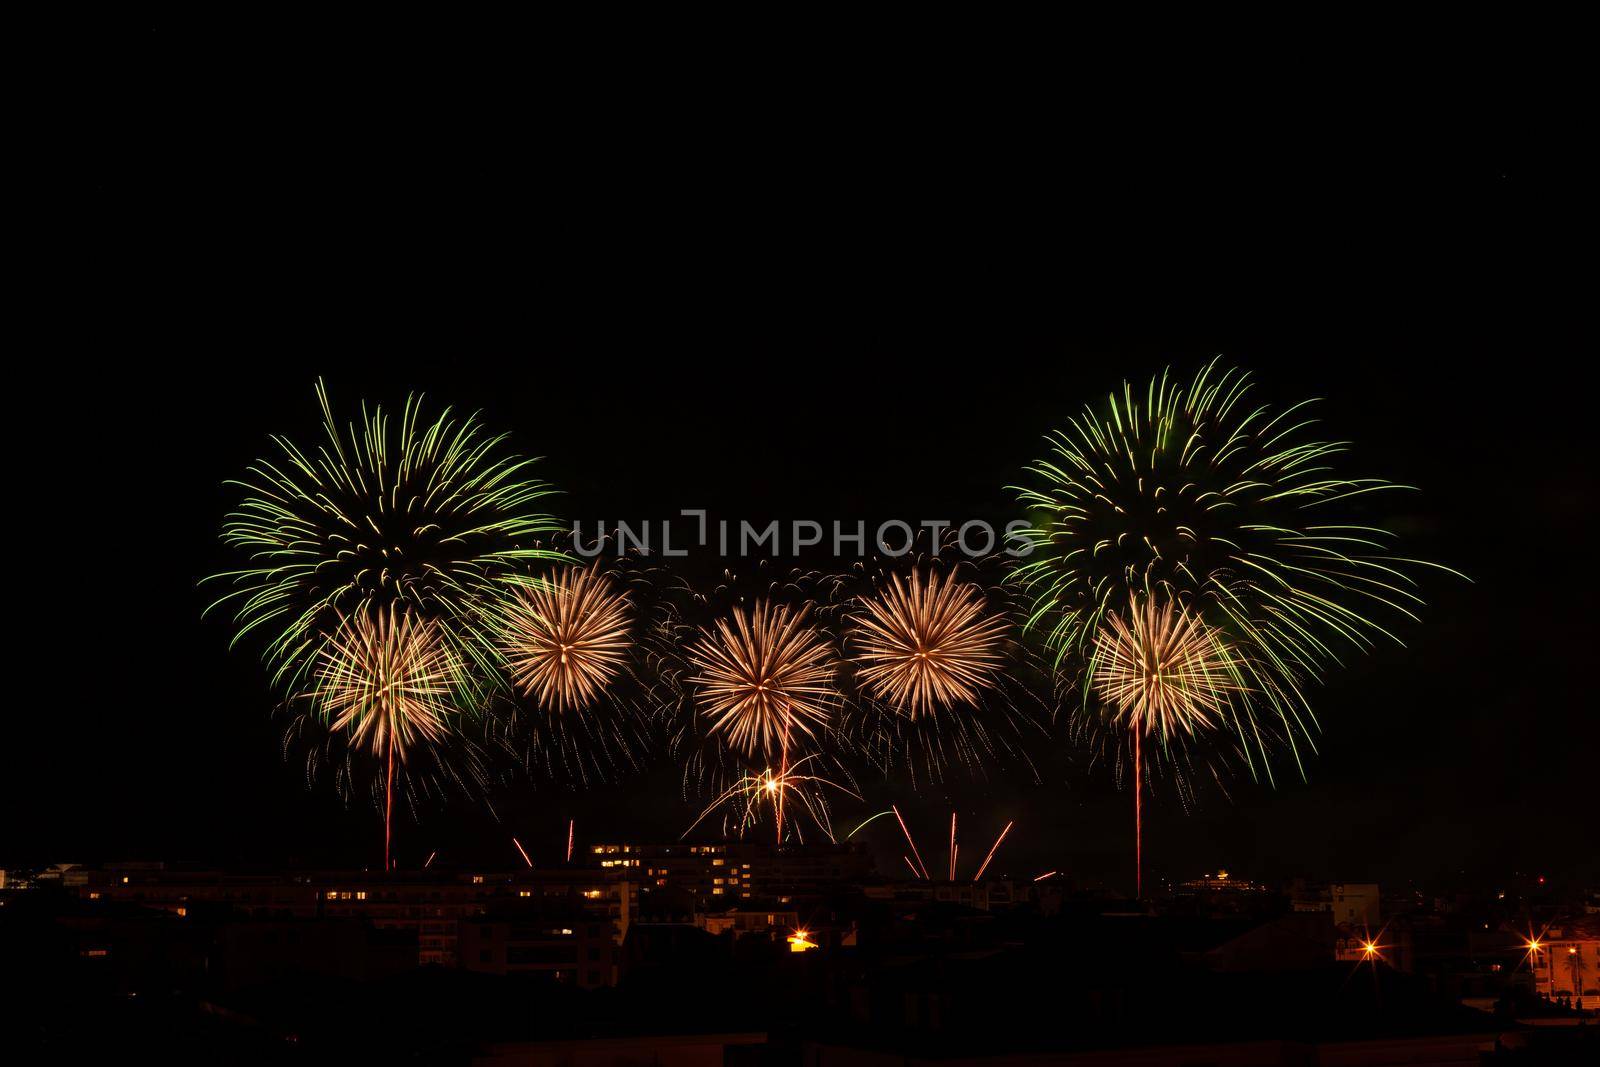 bright green and yellow fireworks in a night sky